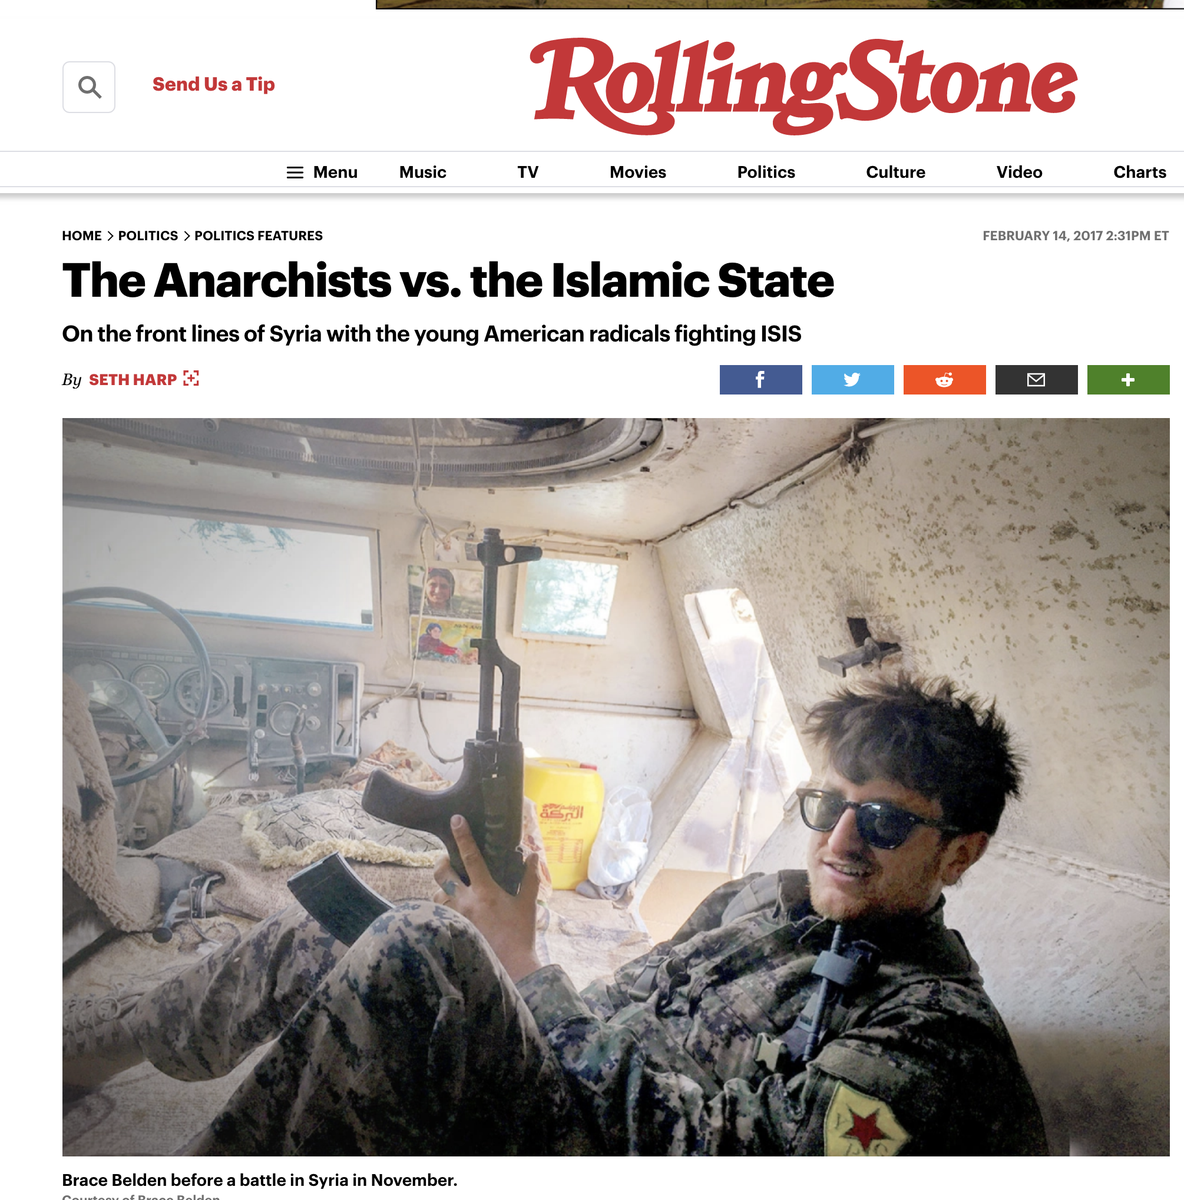 None of this is news, though.Like, at all.That Rolling Stone article where Brace poses with guns, brags about urinating on piles of corpses and skulls, and is like "oopsie, did a war crime, my b"?It's from February 2017.